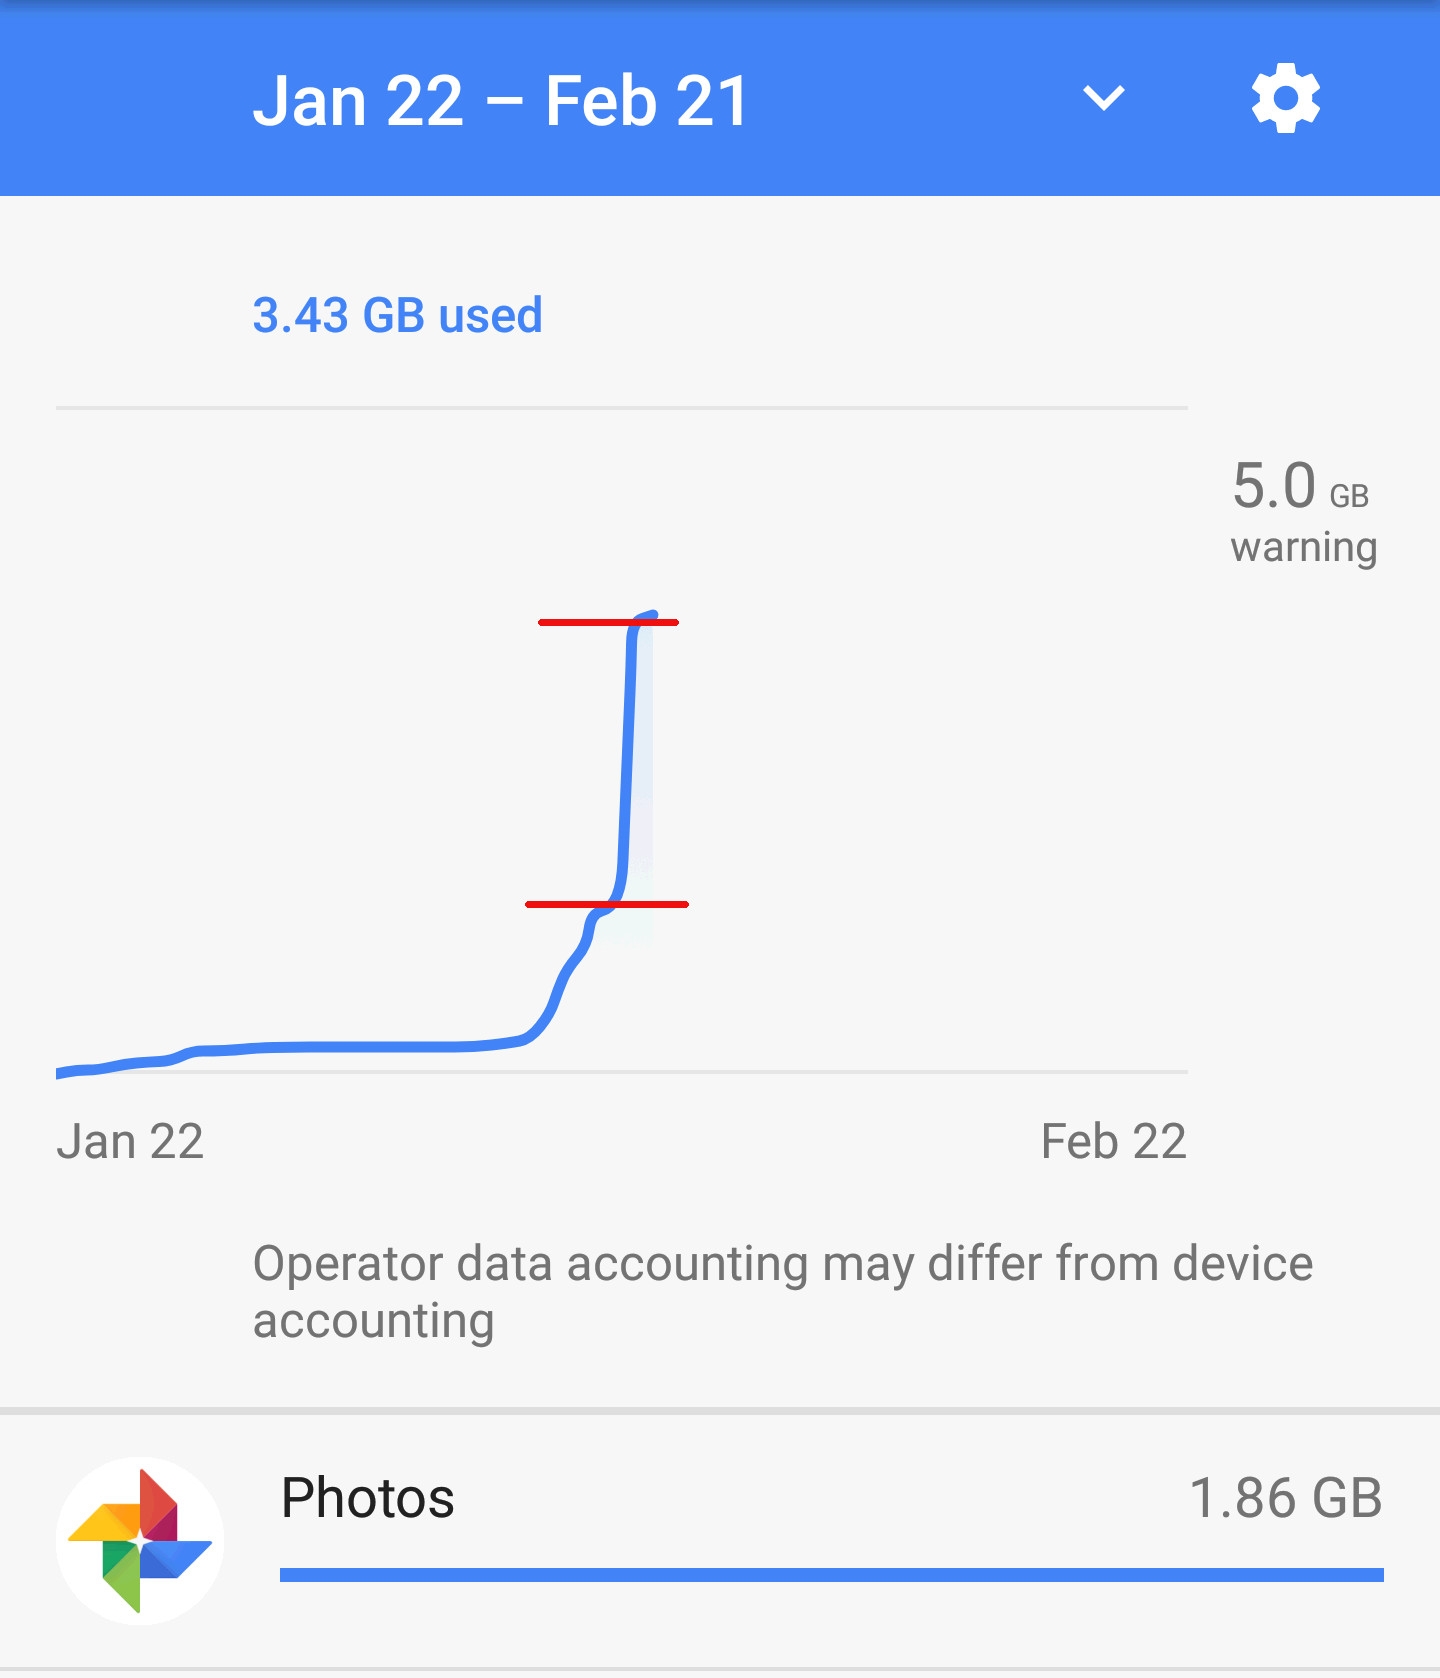 Roaming mobile data usage during high congestion